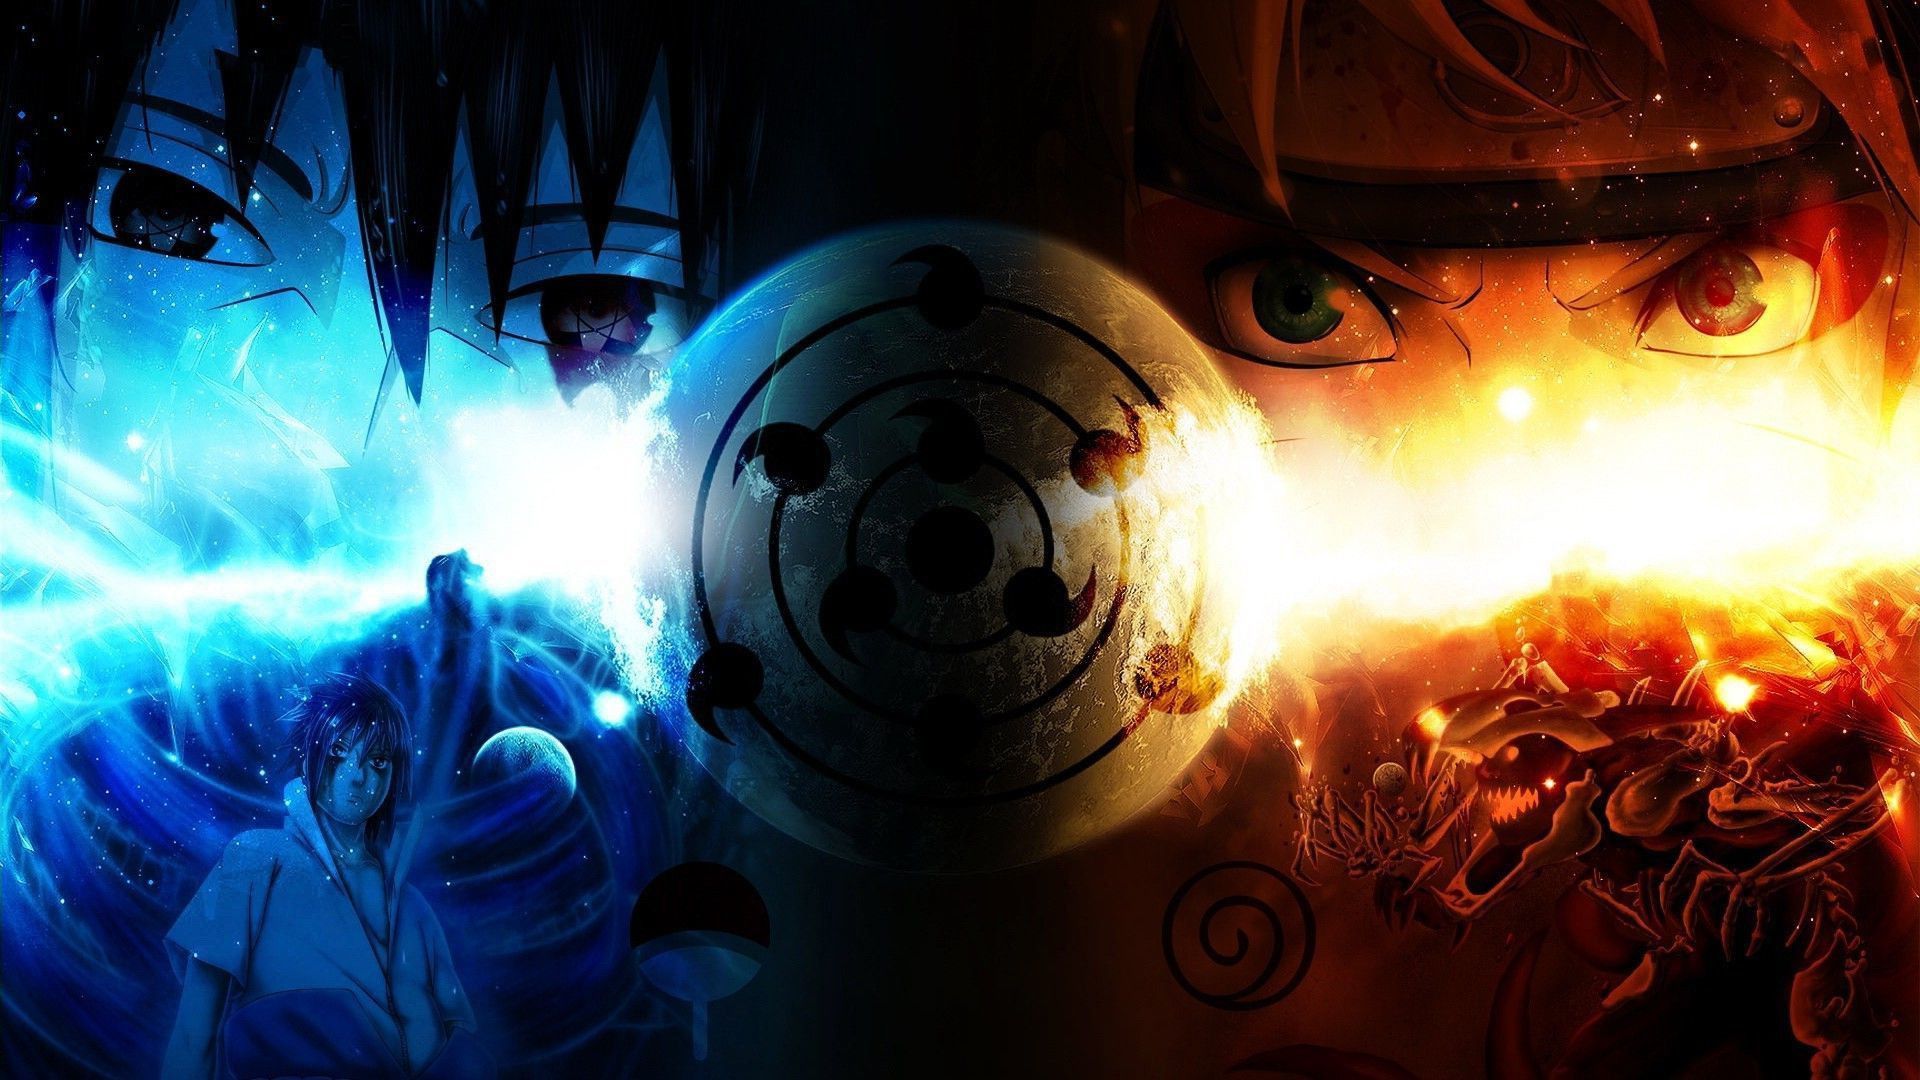 Naruto Fire And Ice Hd Anime Wallpapers Desktop Wallpapers